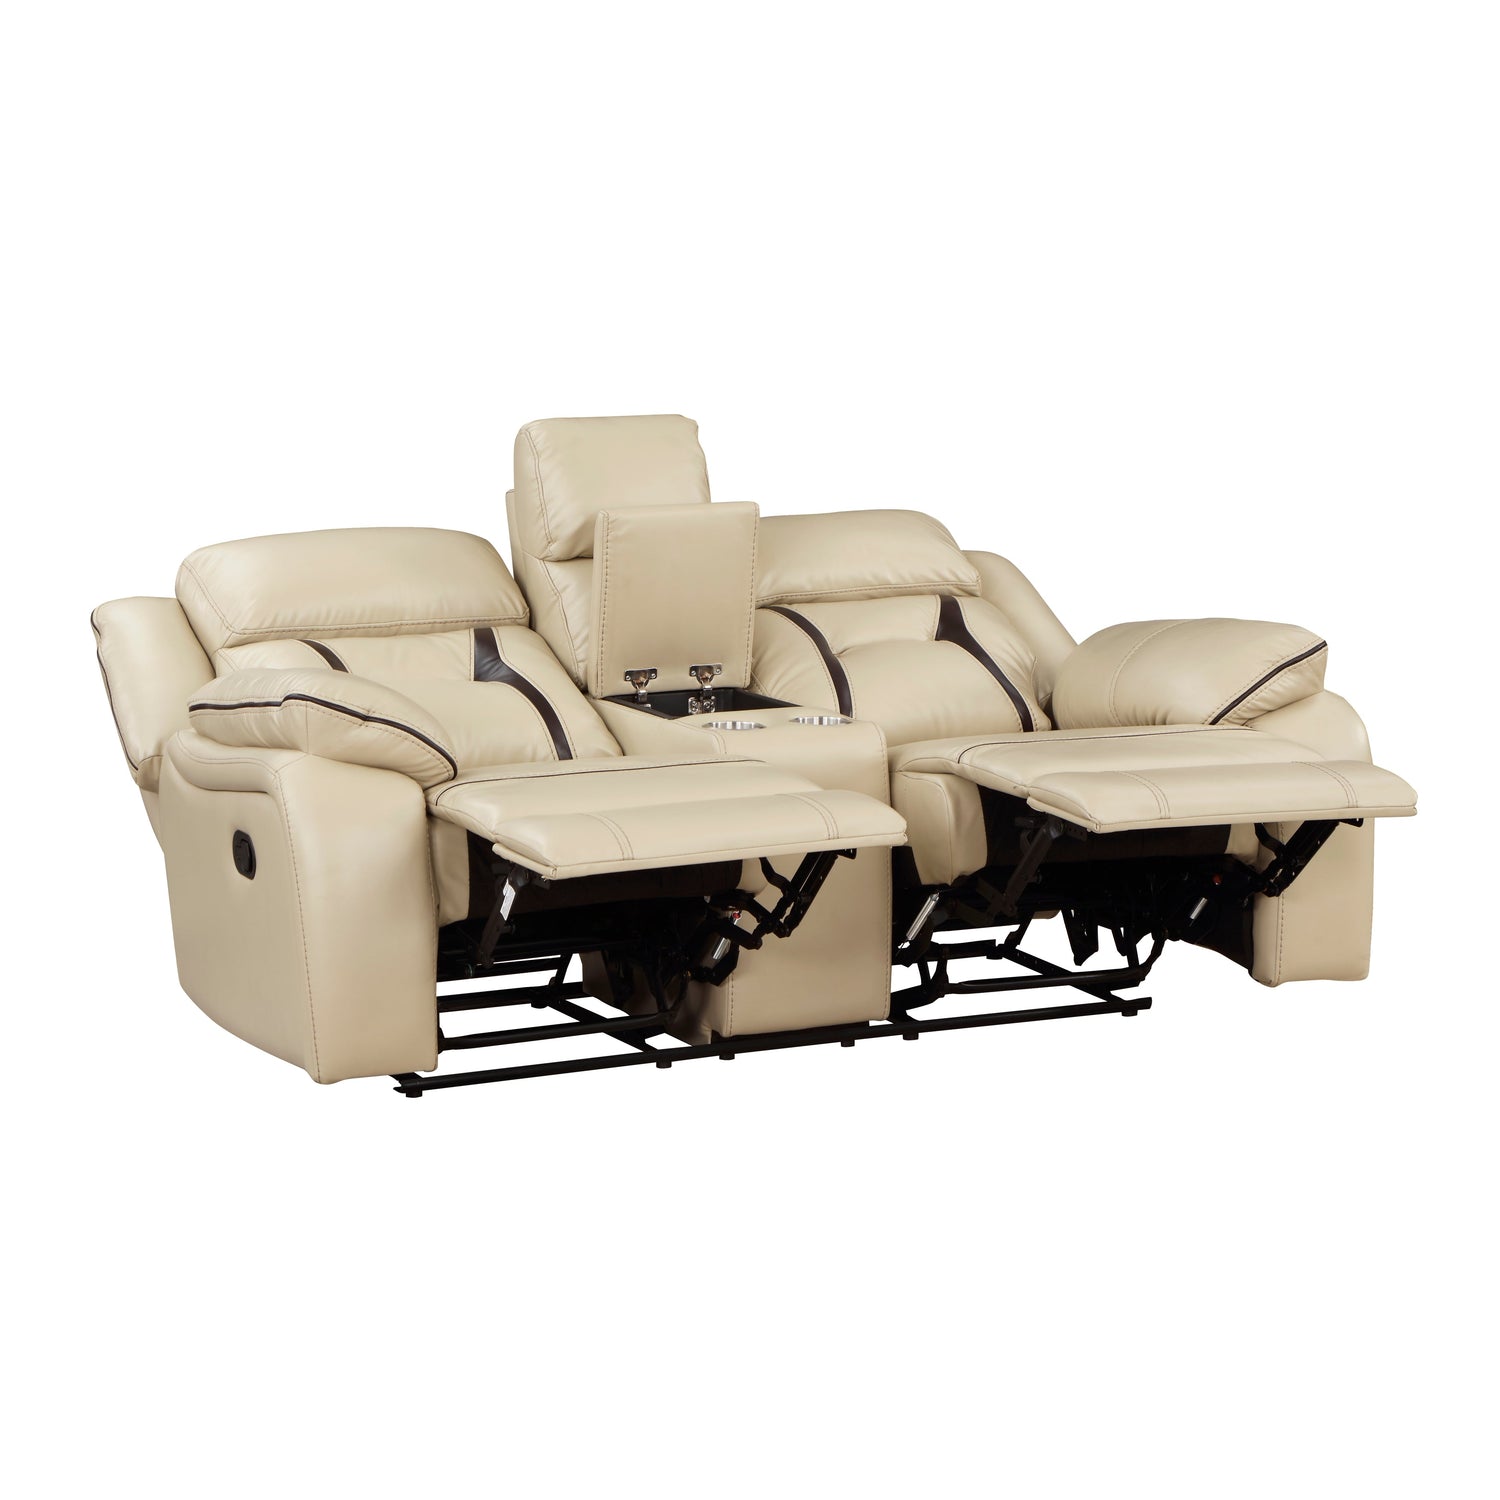 Amite Beige Double Reclining Loveseat with Center Console - 8229NBE-2 - Bien Home Furniture &amp; Electronics